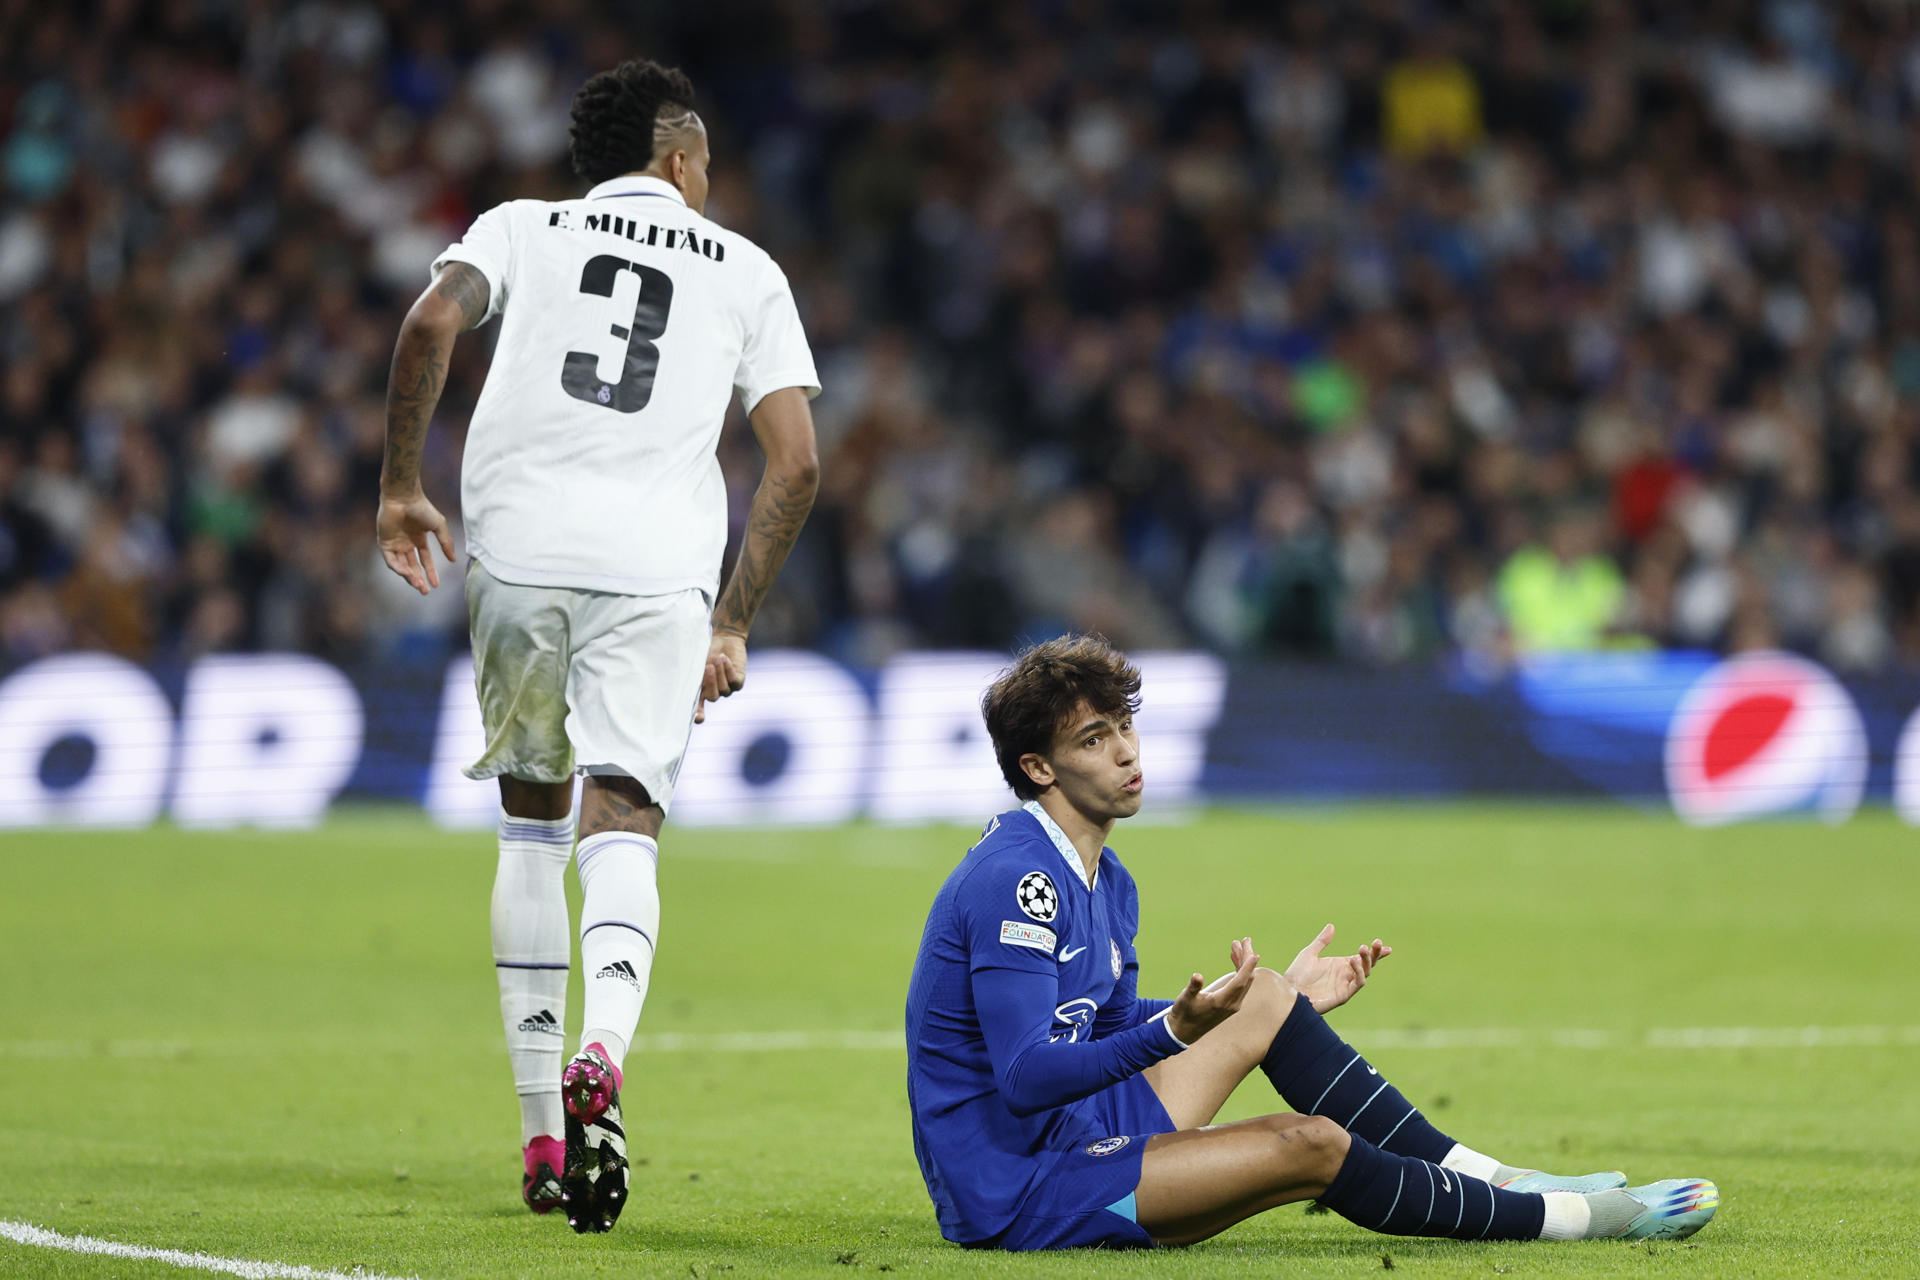 Chelsea's Joao Felix criticised after Madrid clash